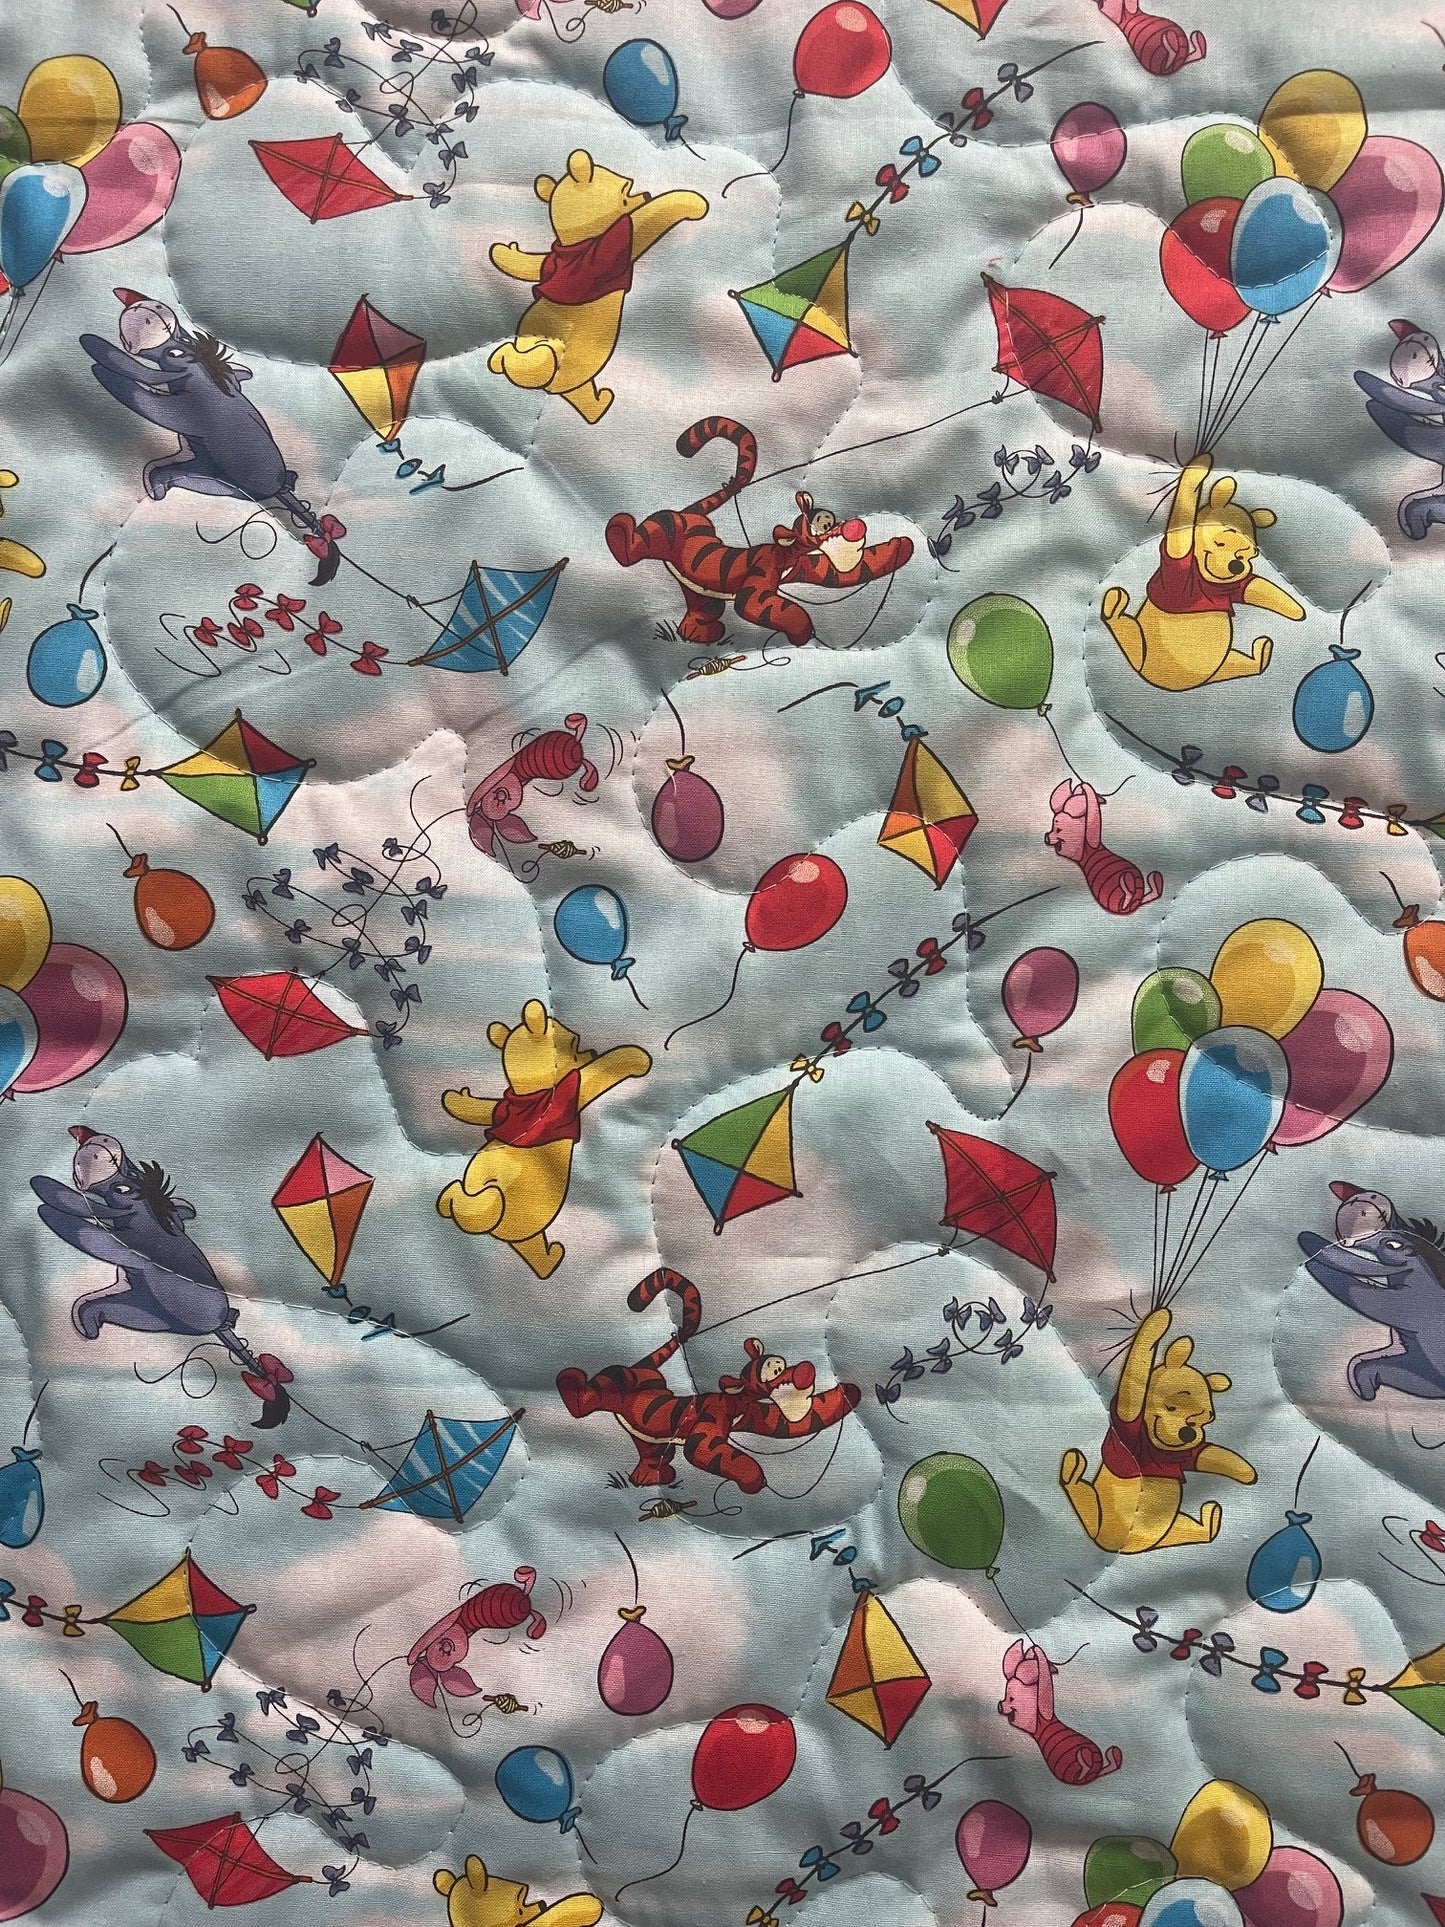 CLASSIC WINNIE THE POOH CHARACTERS FLYING KITES AND BALLOONS INSPIRED QUILTED BLANKET